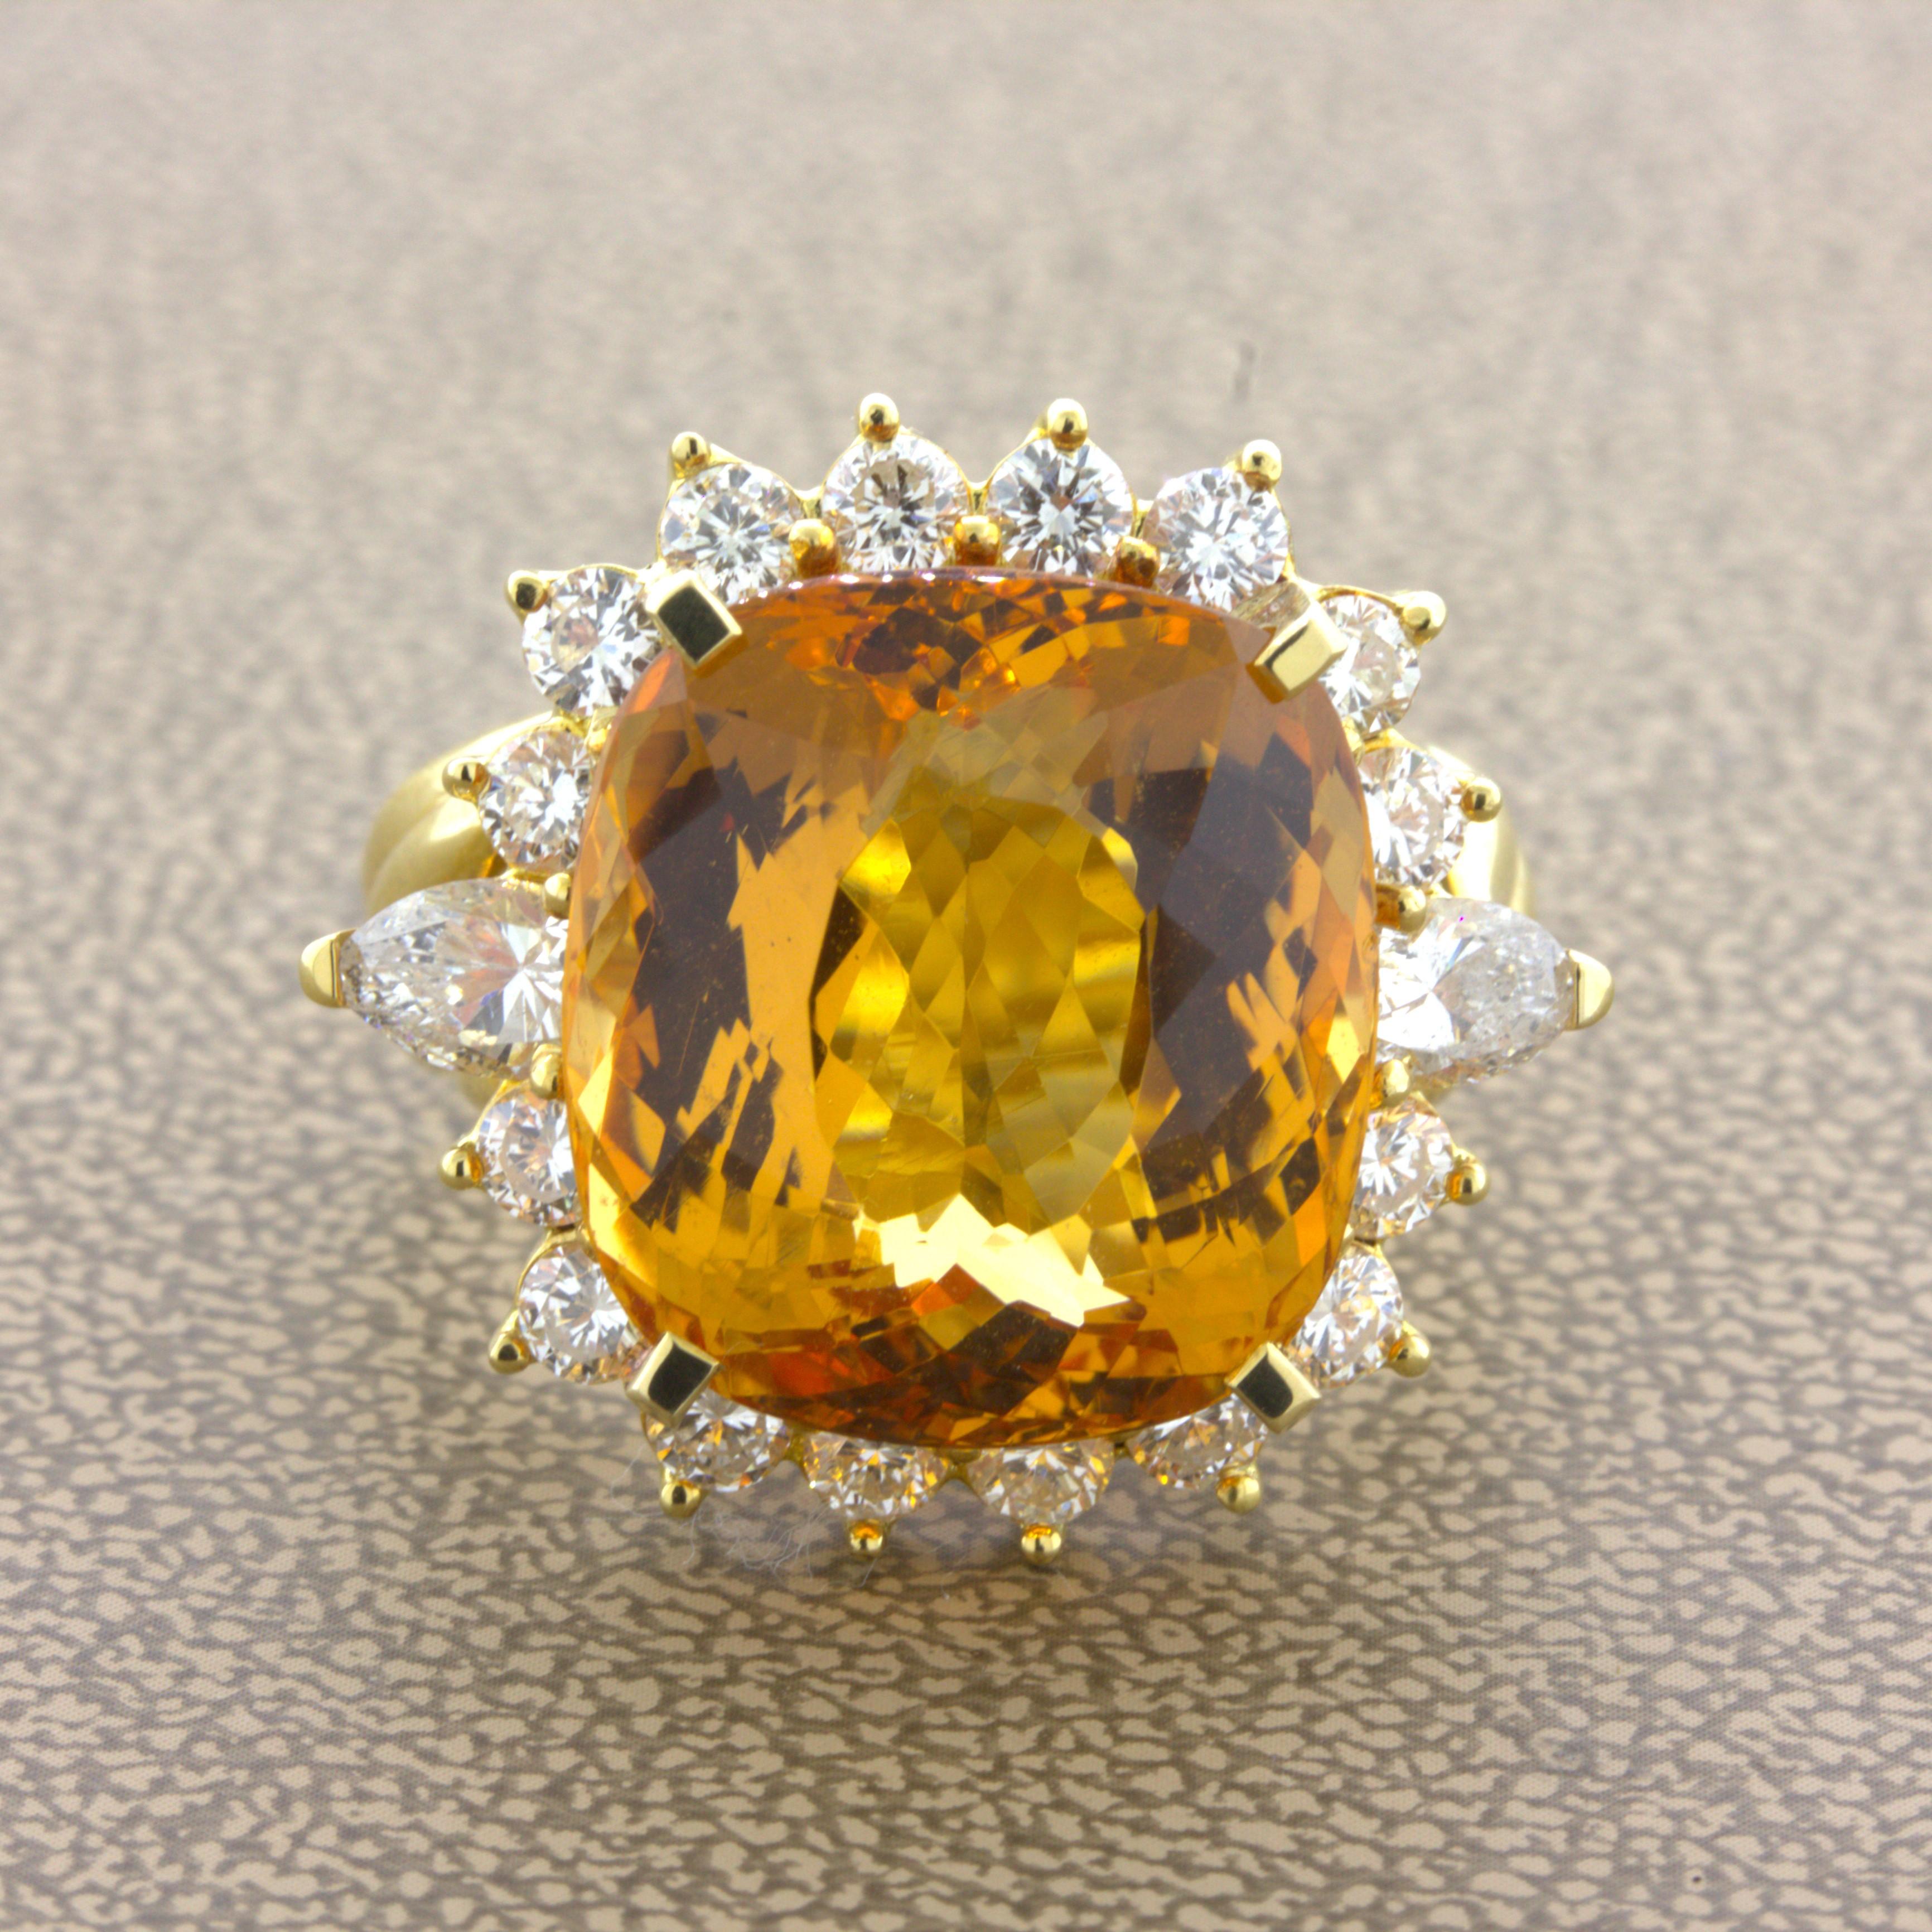 A rich, chic, and elegant ring featuring a very fine and rare imperial topaz. What makes the stone special is its combination of large size, 22.36 carats, and its very fine rich vivid golden orange color. Adding to that, the stone is extremely clean